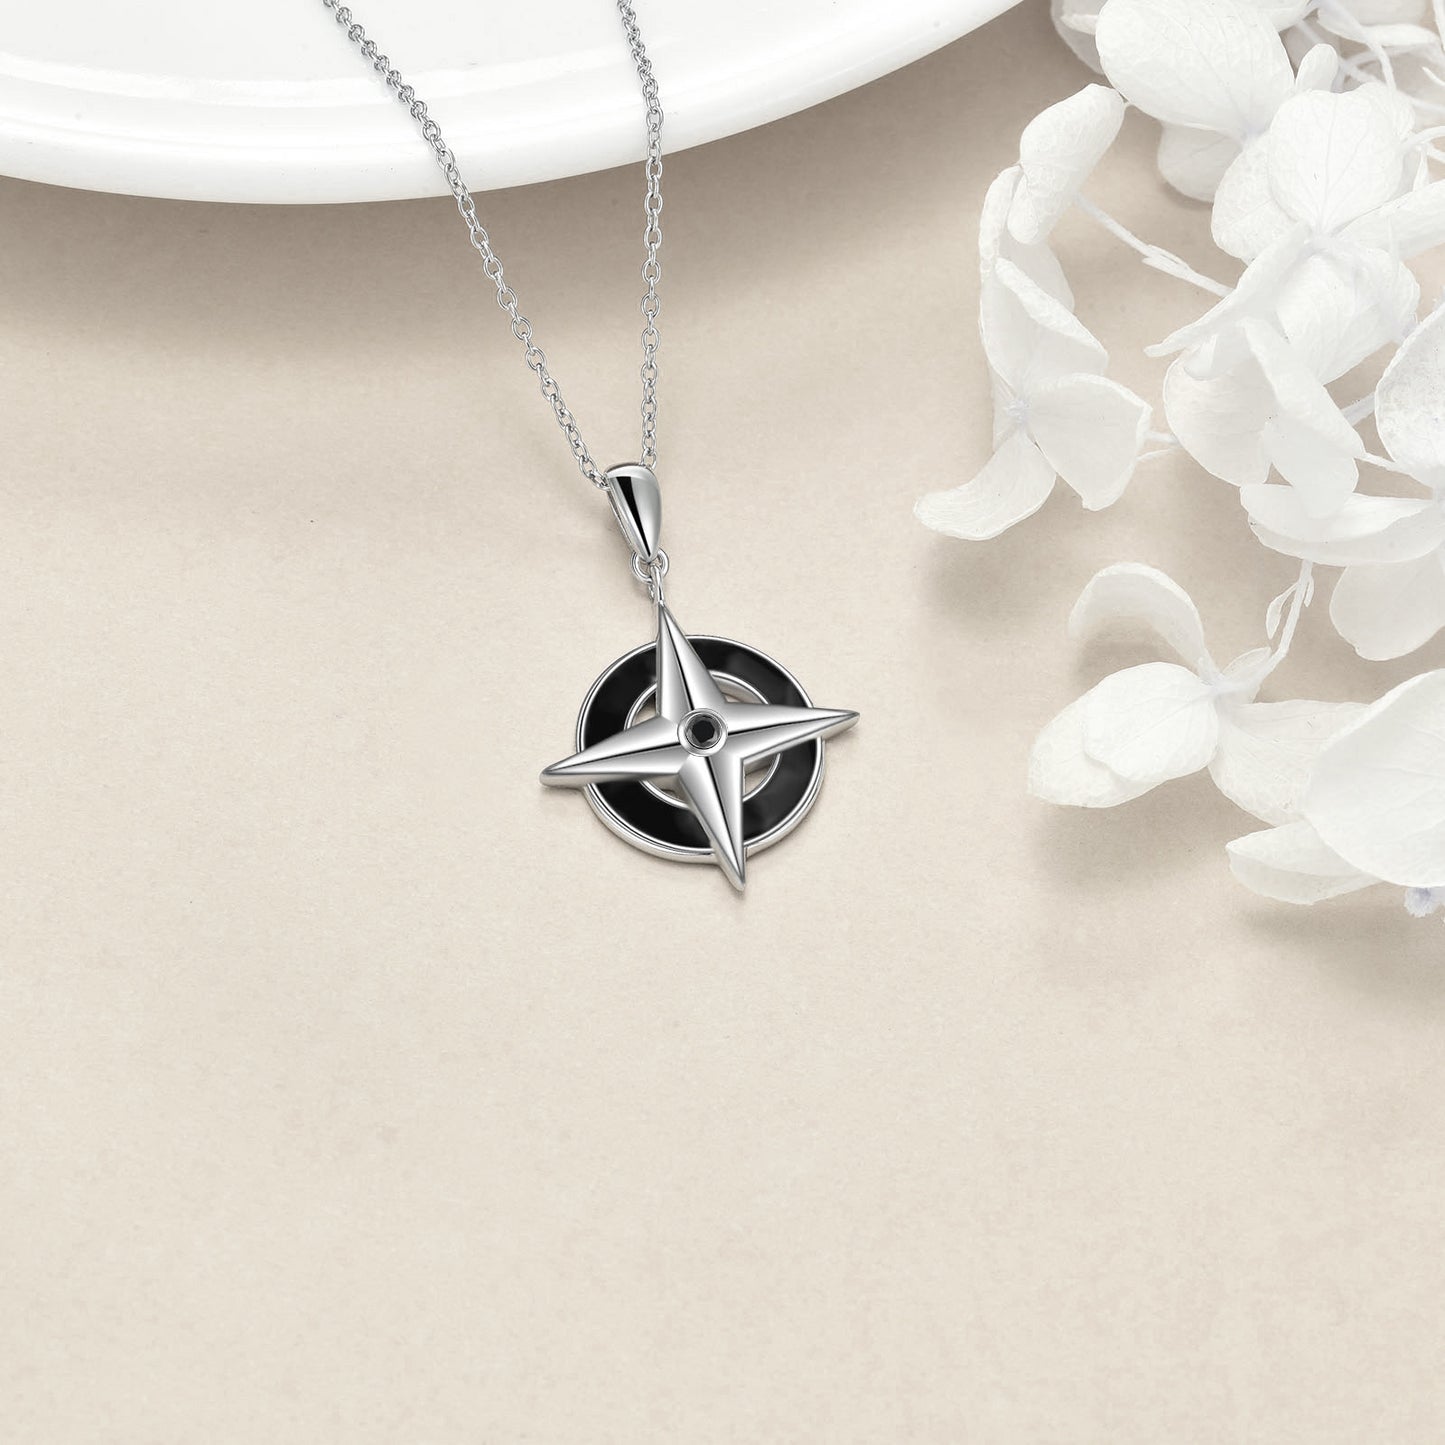 A Maramalive™ Enamel Compass Necklace - Sterling Silver on a chain.